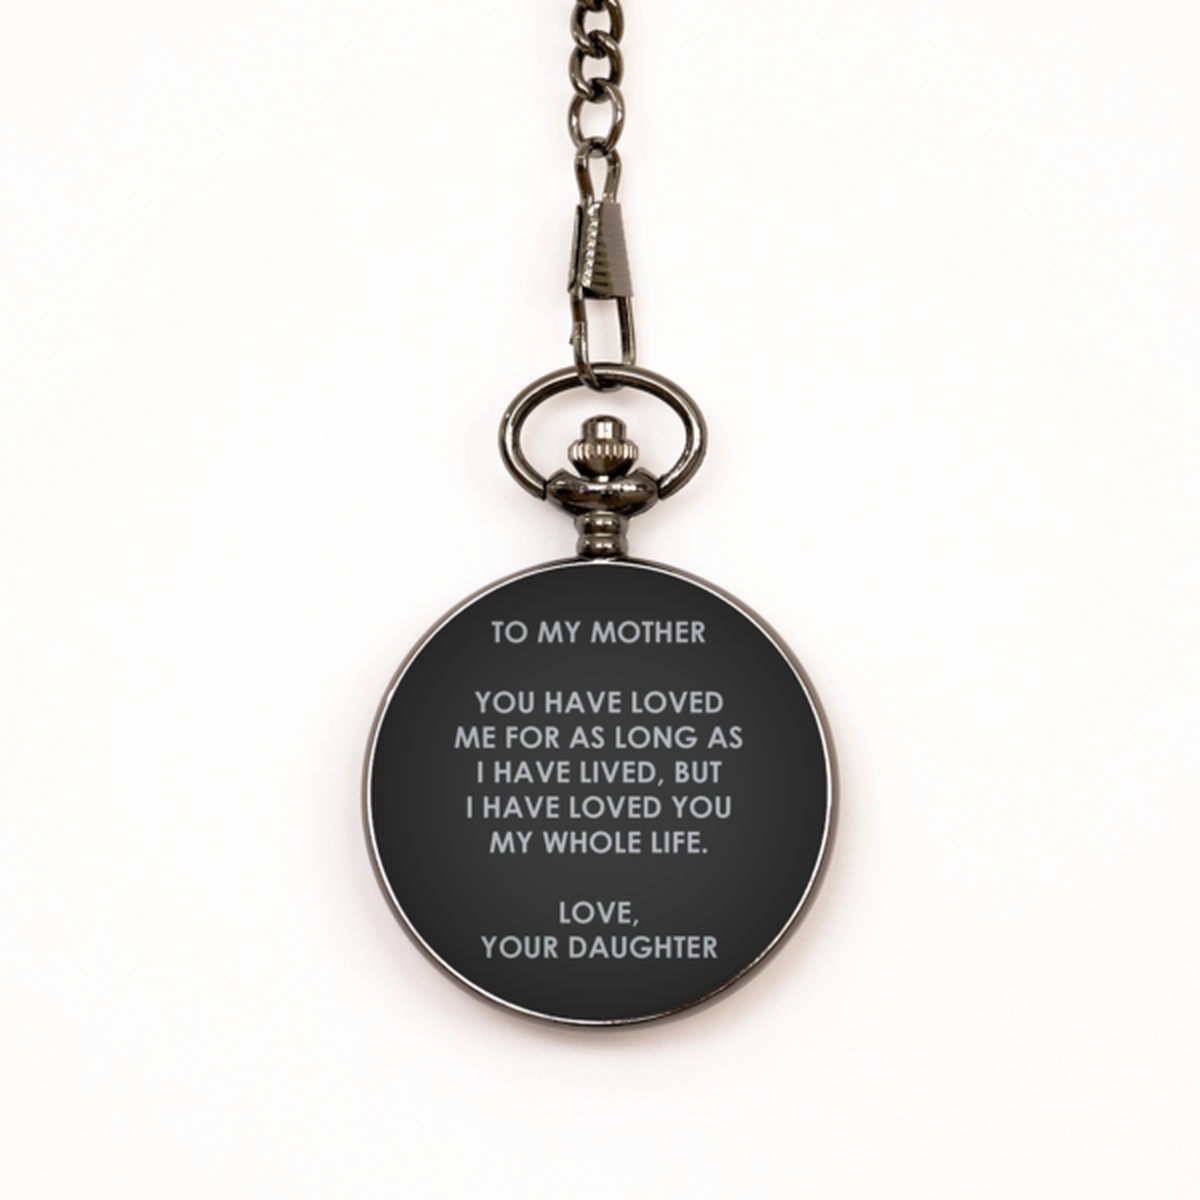 To My Mother  Black Pocket Watch, My Whole Life, Valentines Gifts For Mother From Daughter, Birthday Gifts For Women